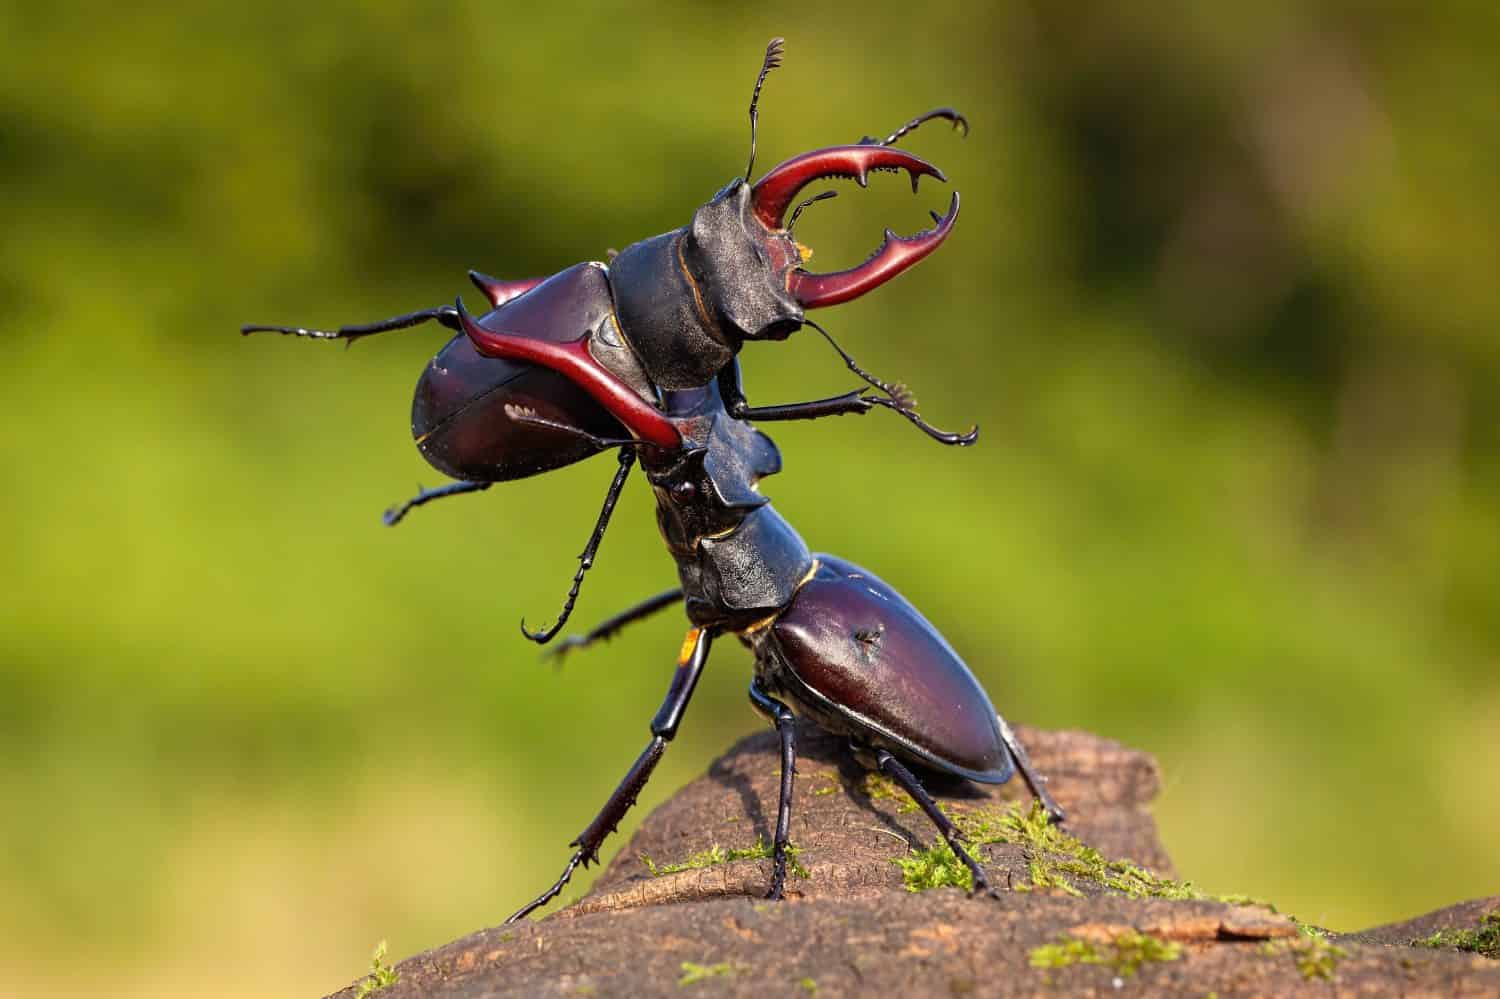 Two male stag beetles, lucanus cervus, contesting their power over territory on a sunny day in summer with green blurred background. Brown horned bugs fighting in nature.